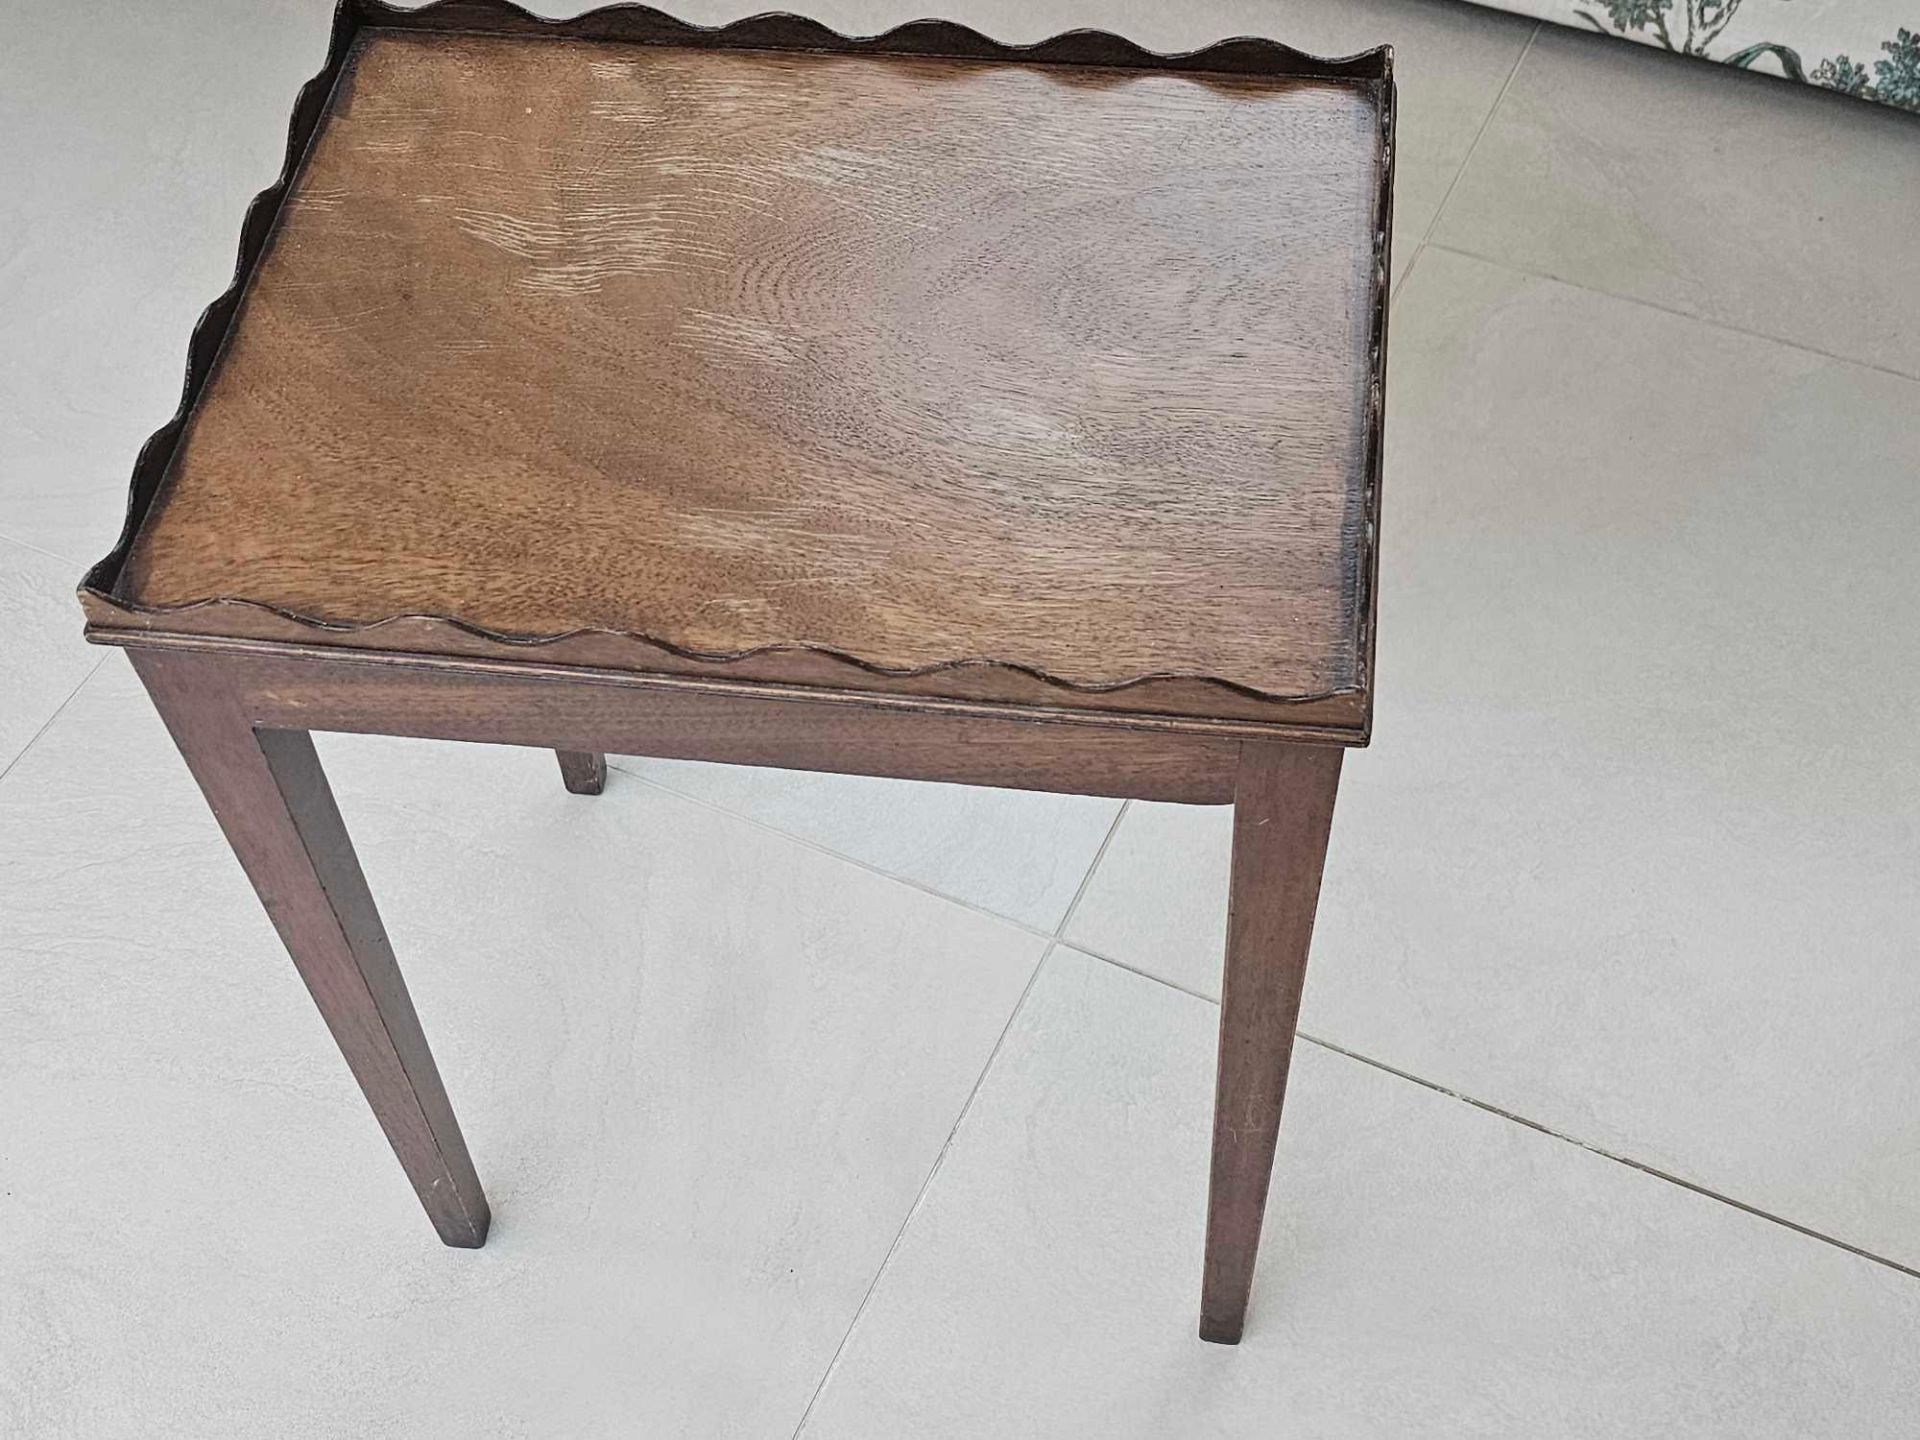 A Scalloped Edge Side Table Raised On Square Tapering Legs 42 X 32 X 52cm - Image 5 of 5